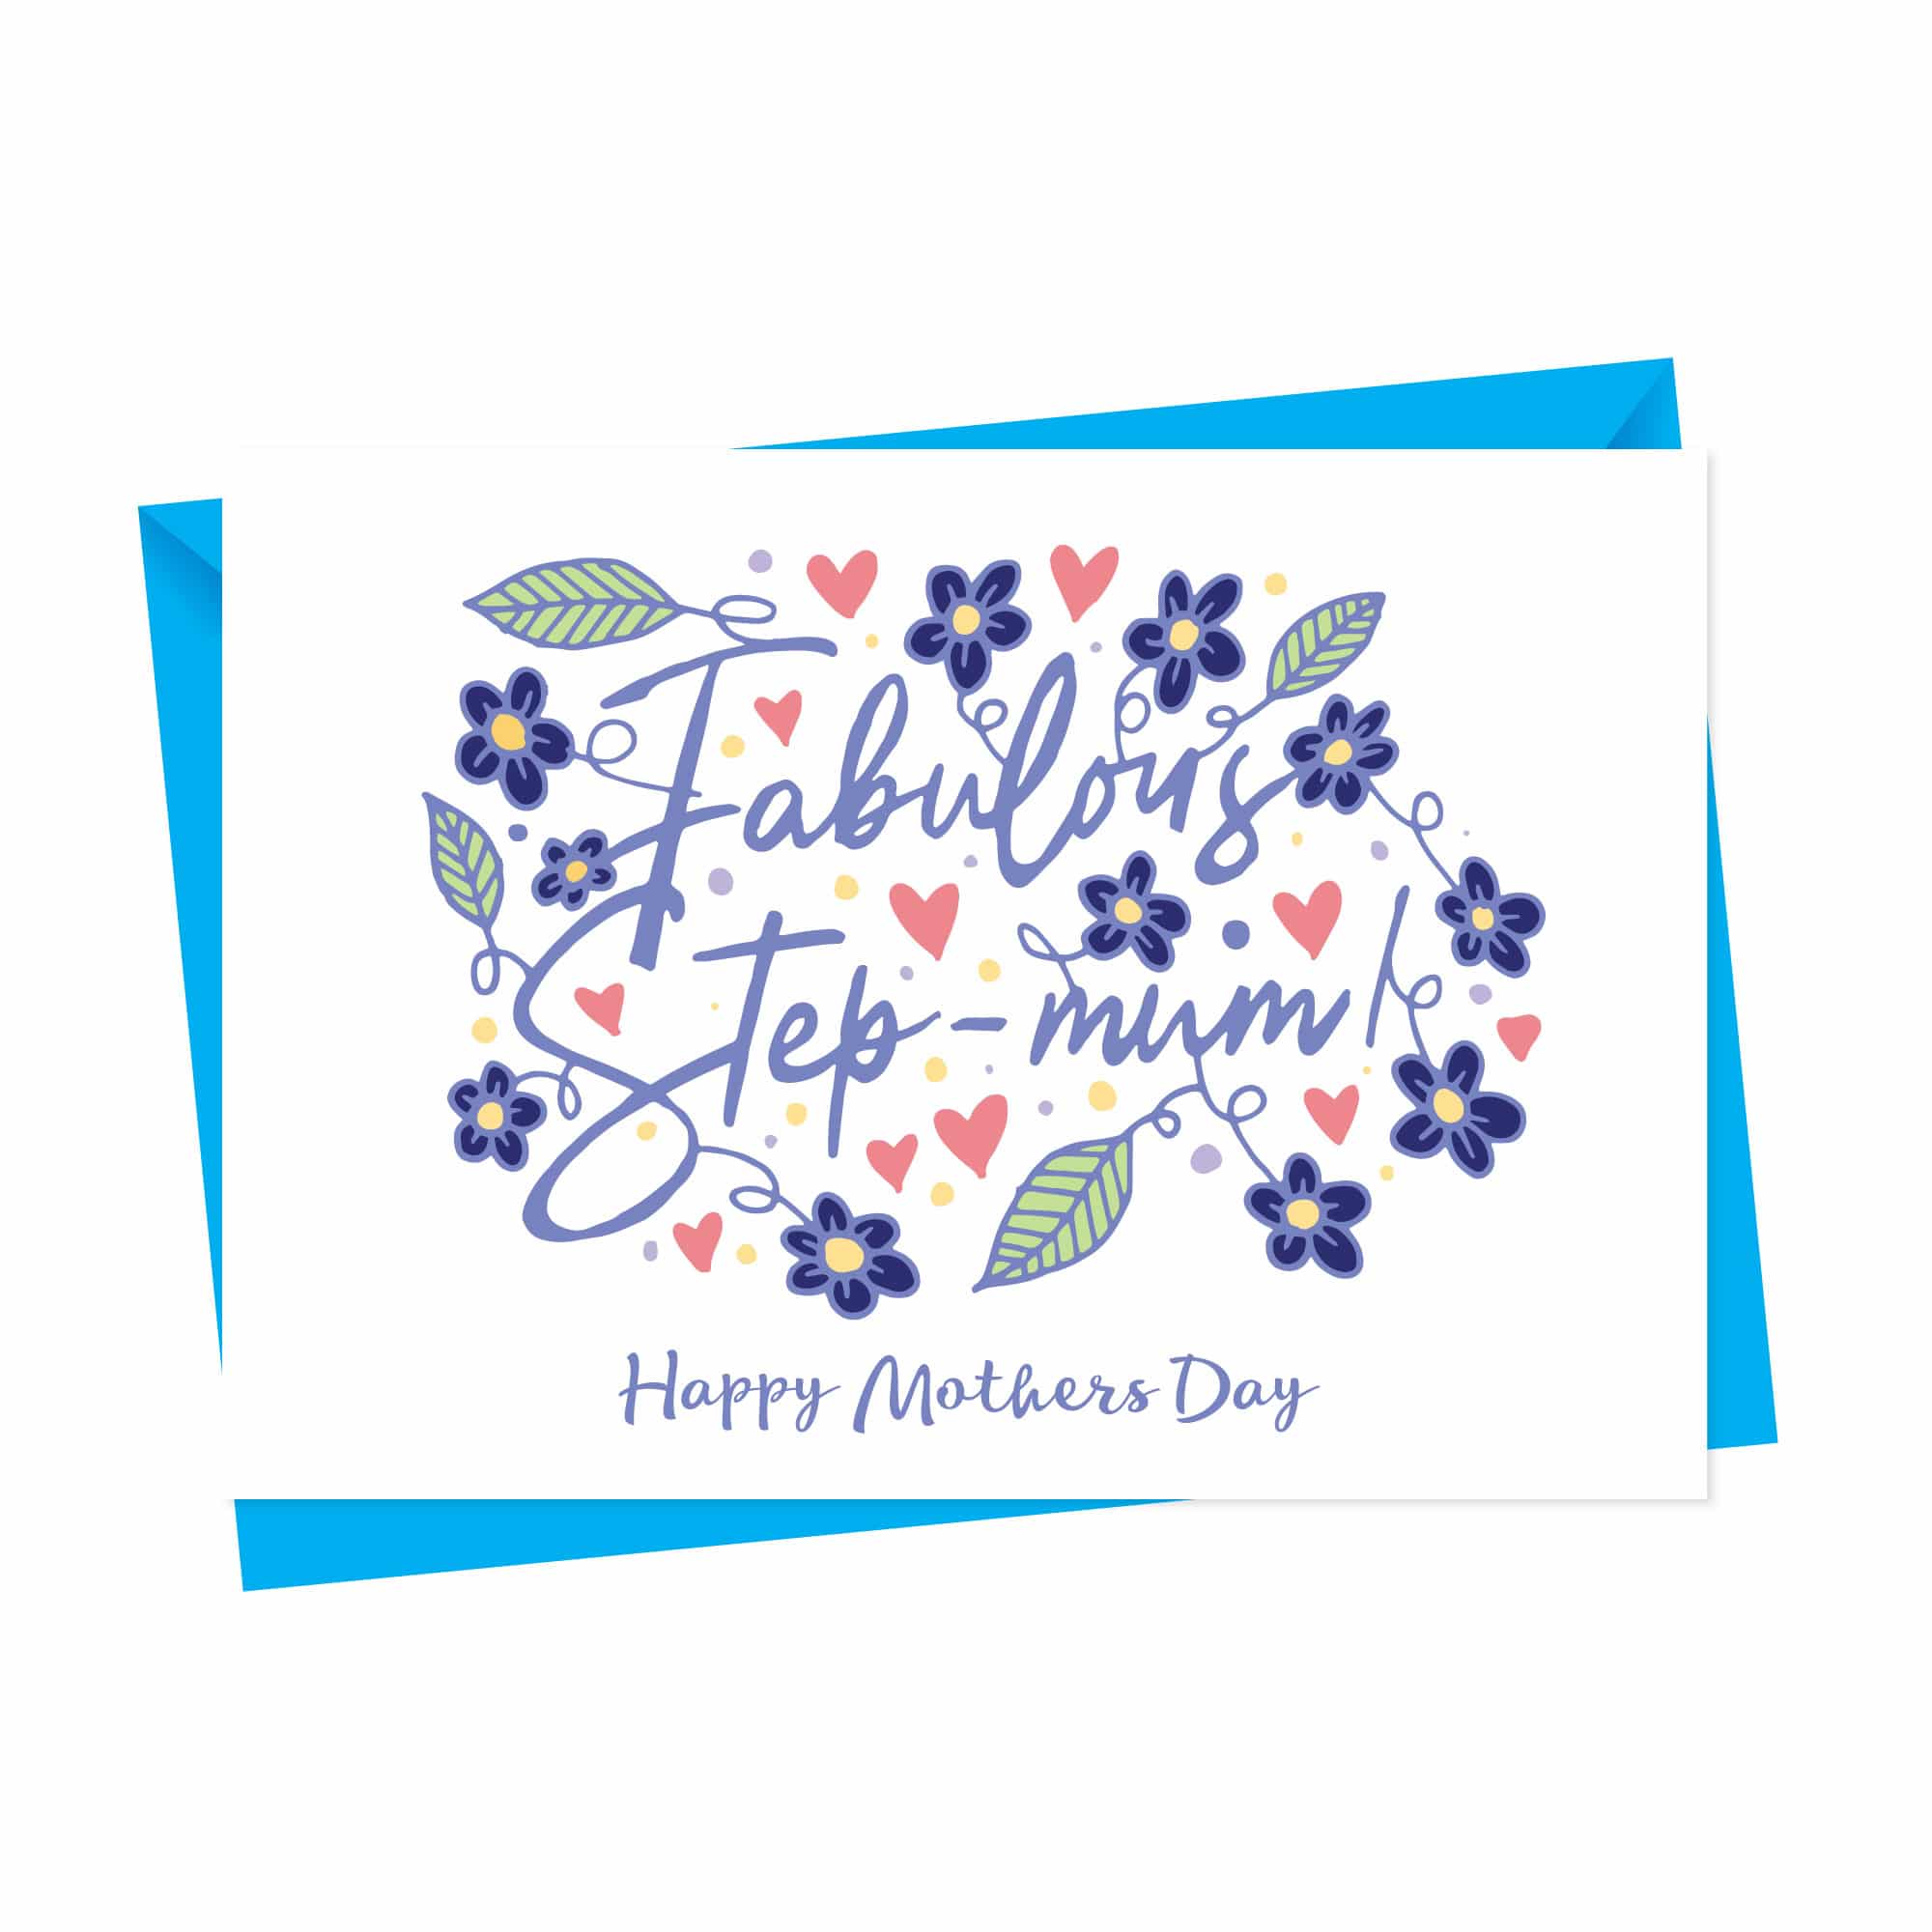 Fabulous step mum Mothers day card